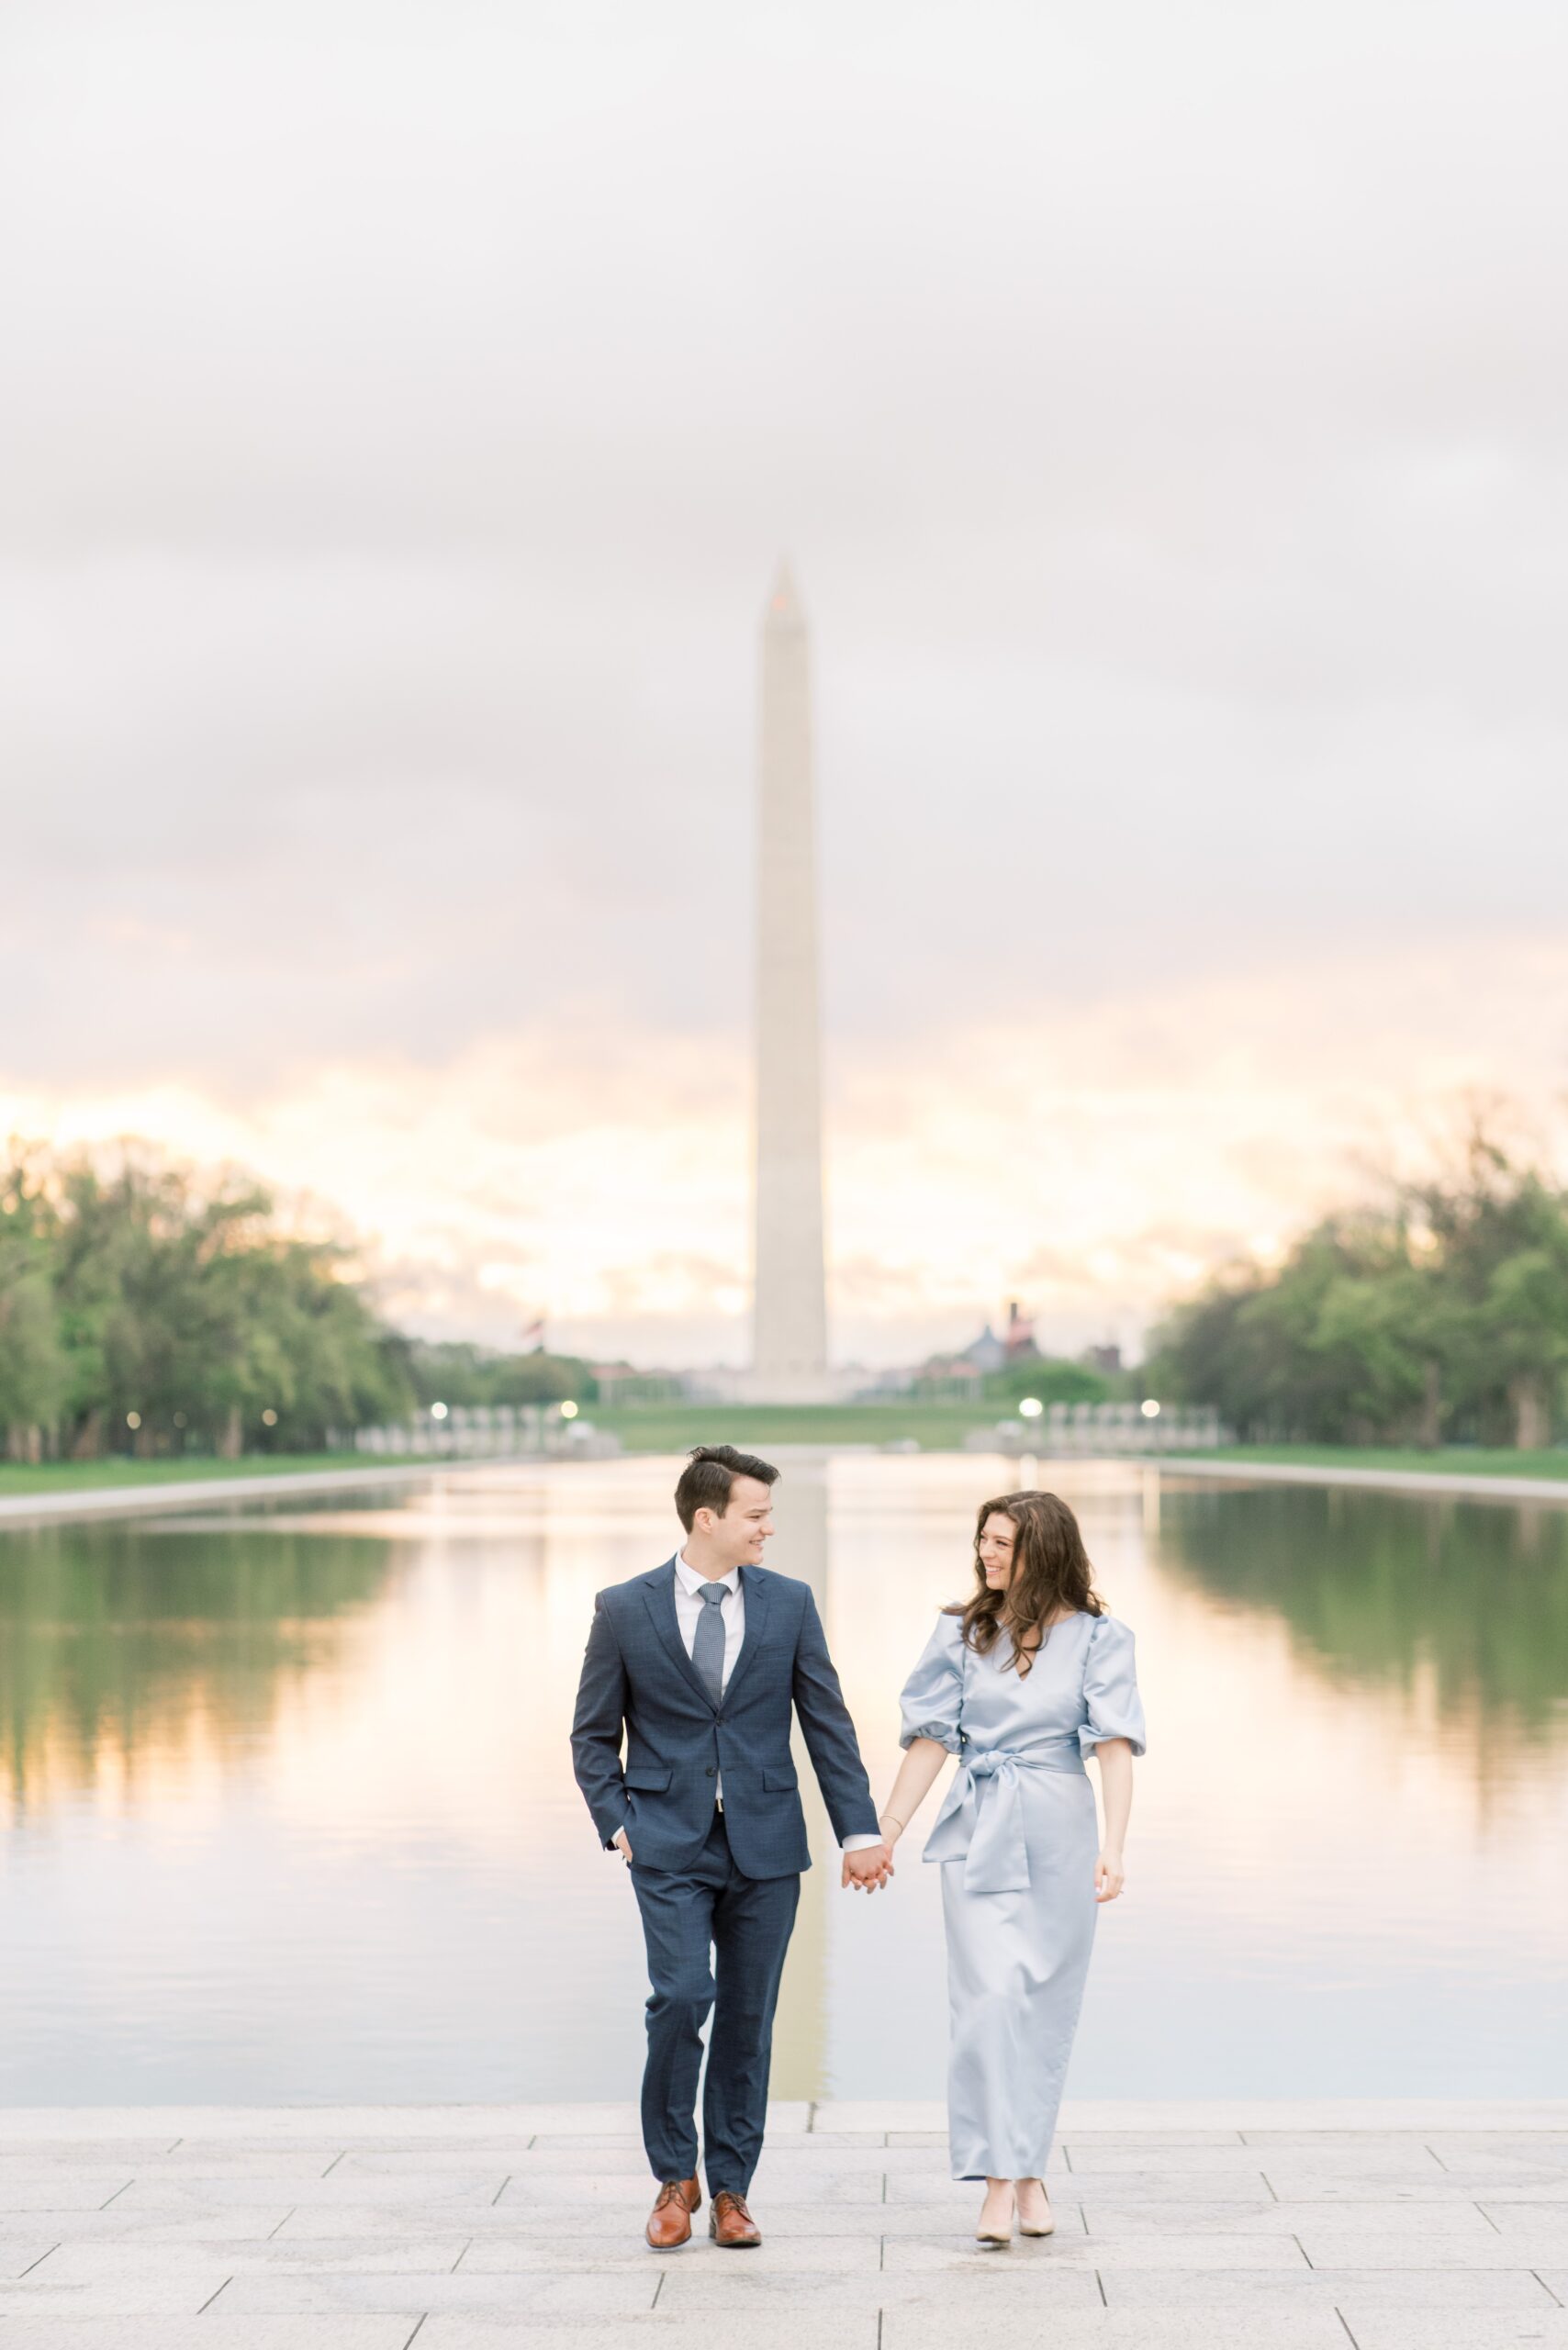 A romantic overcast engagement session at the Reflecting Pool & DC War Memorial on the National Mall in Washington, DC.